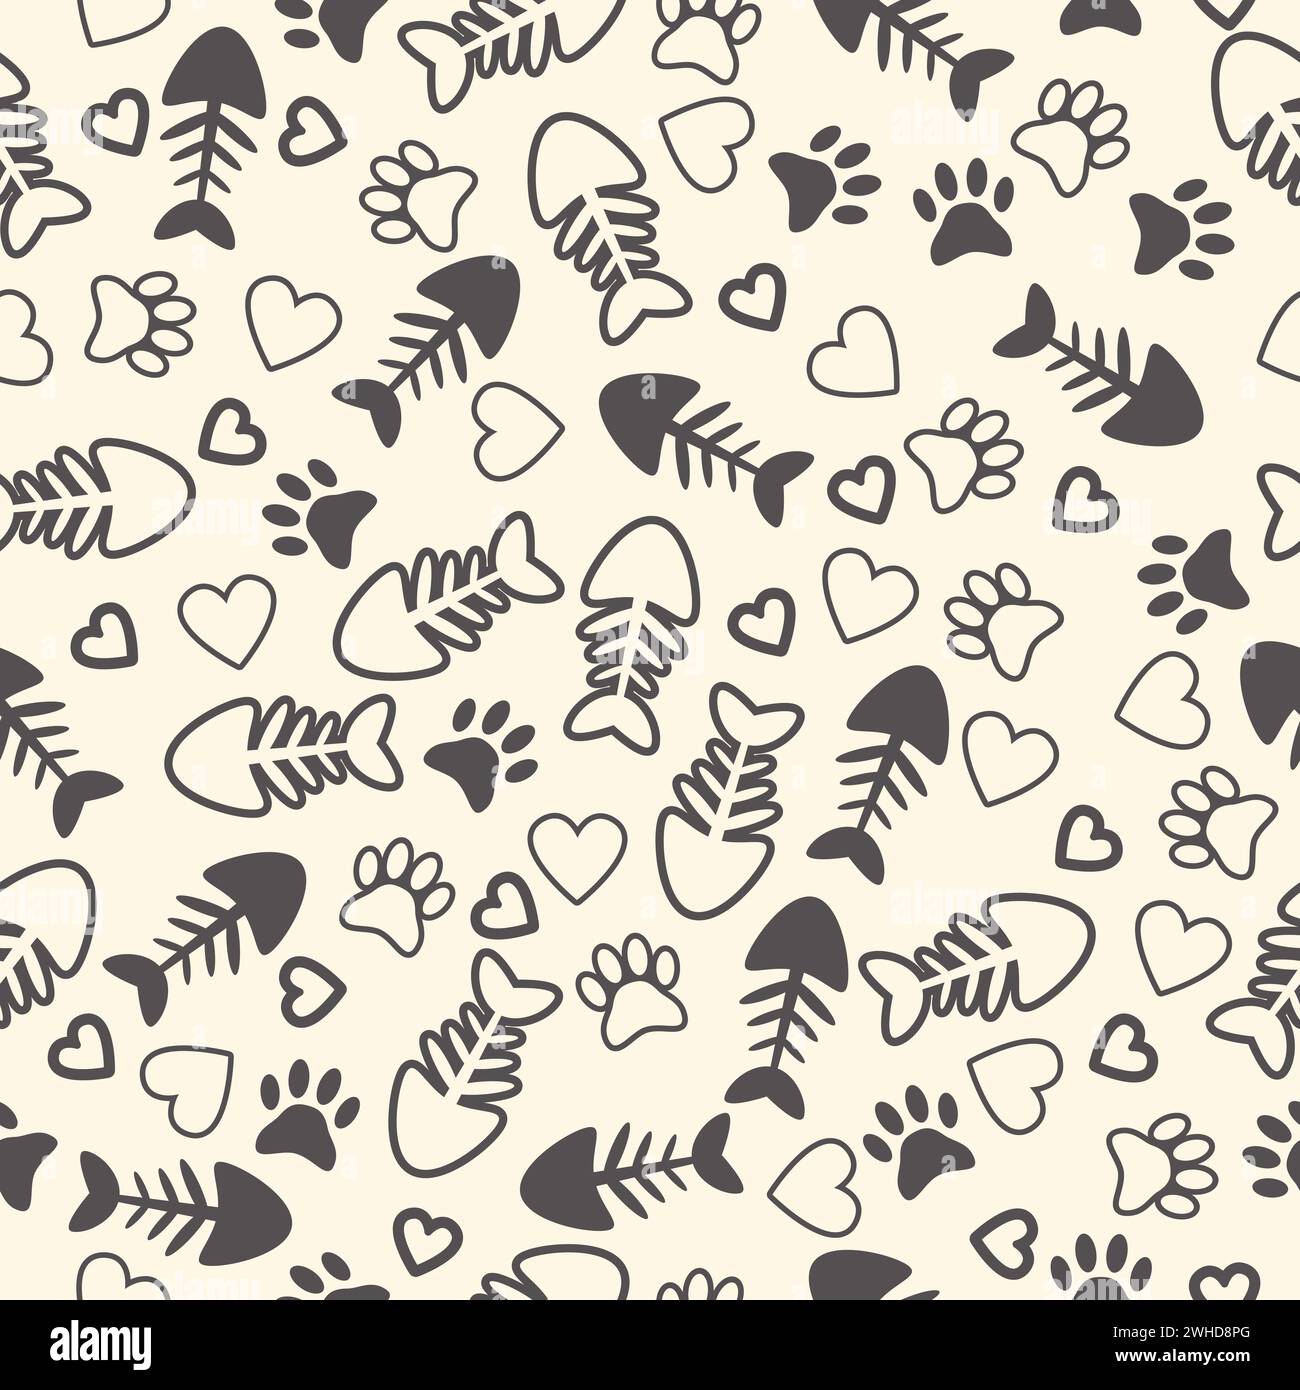 Seamless pattern with cat paw prints, fish bone, and hearts. Endless background. Vector illustration Stock Vector